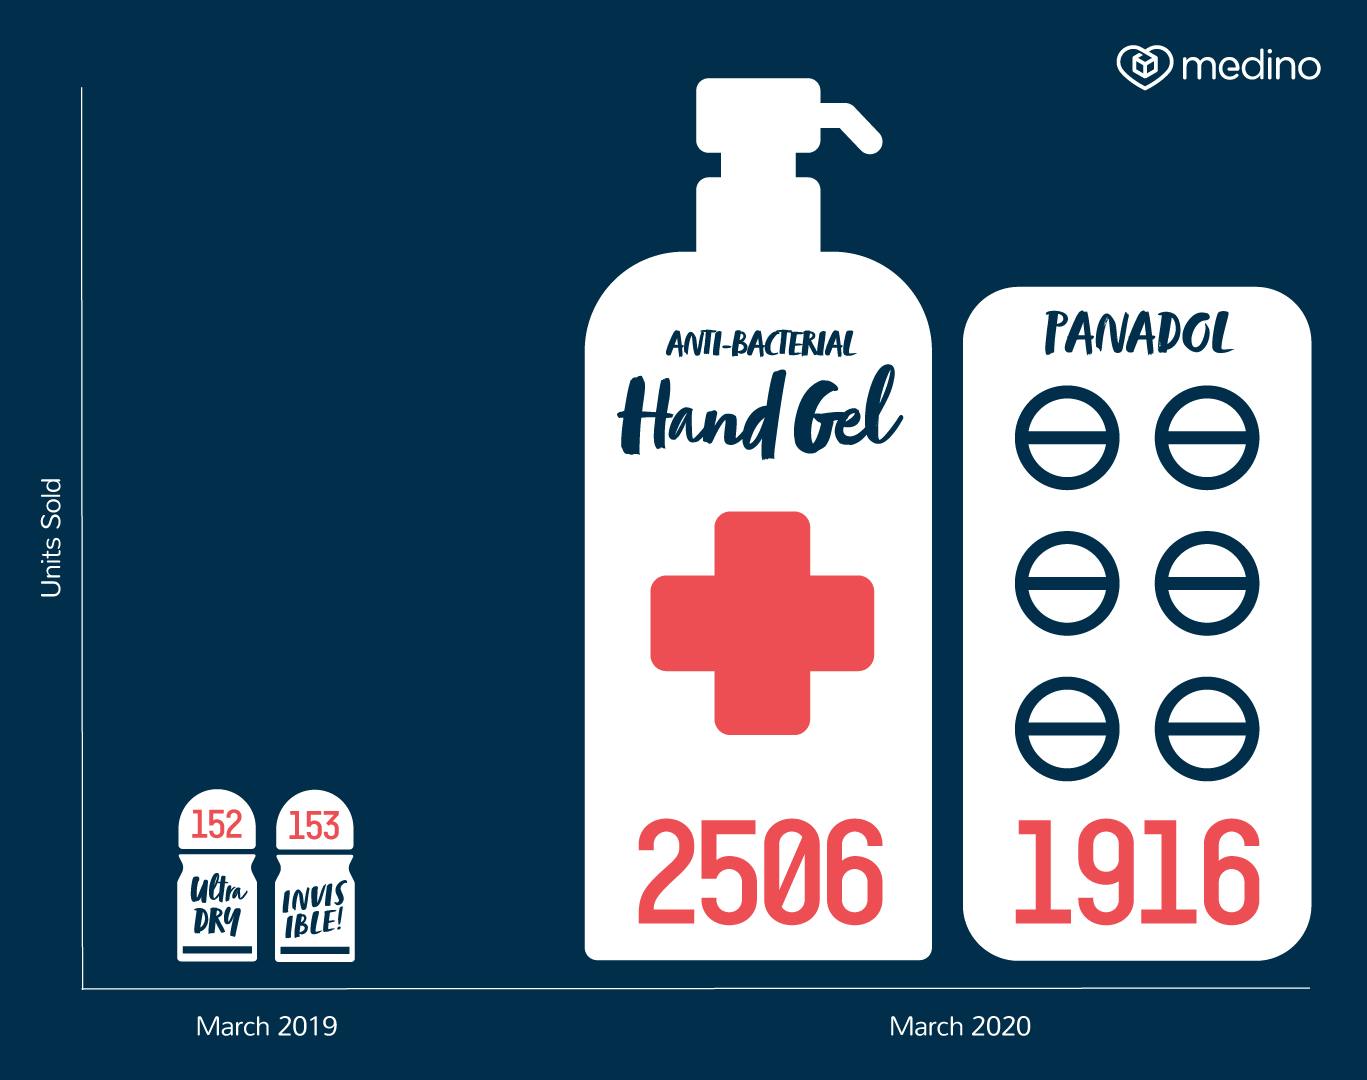 Chart graphic comparing the top products and increase of sales of march 2019 and march 2020, highlighting paracetomol and hand gel